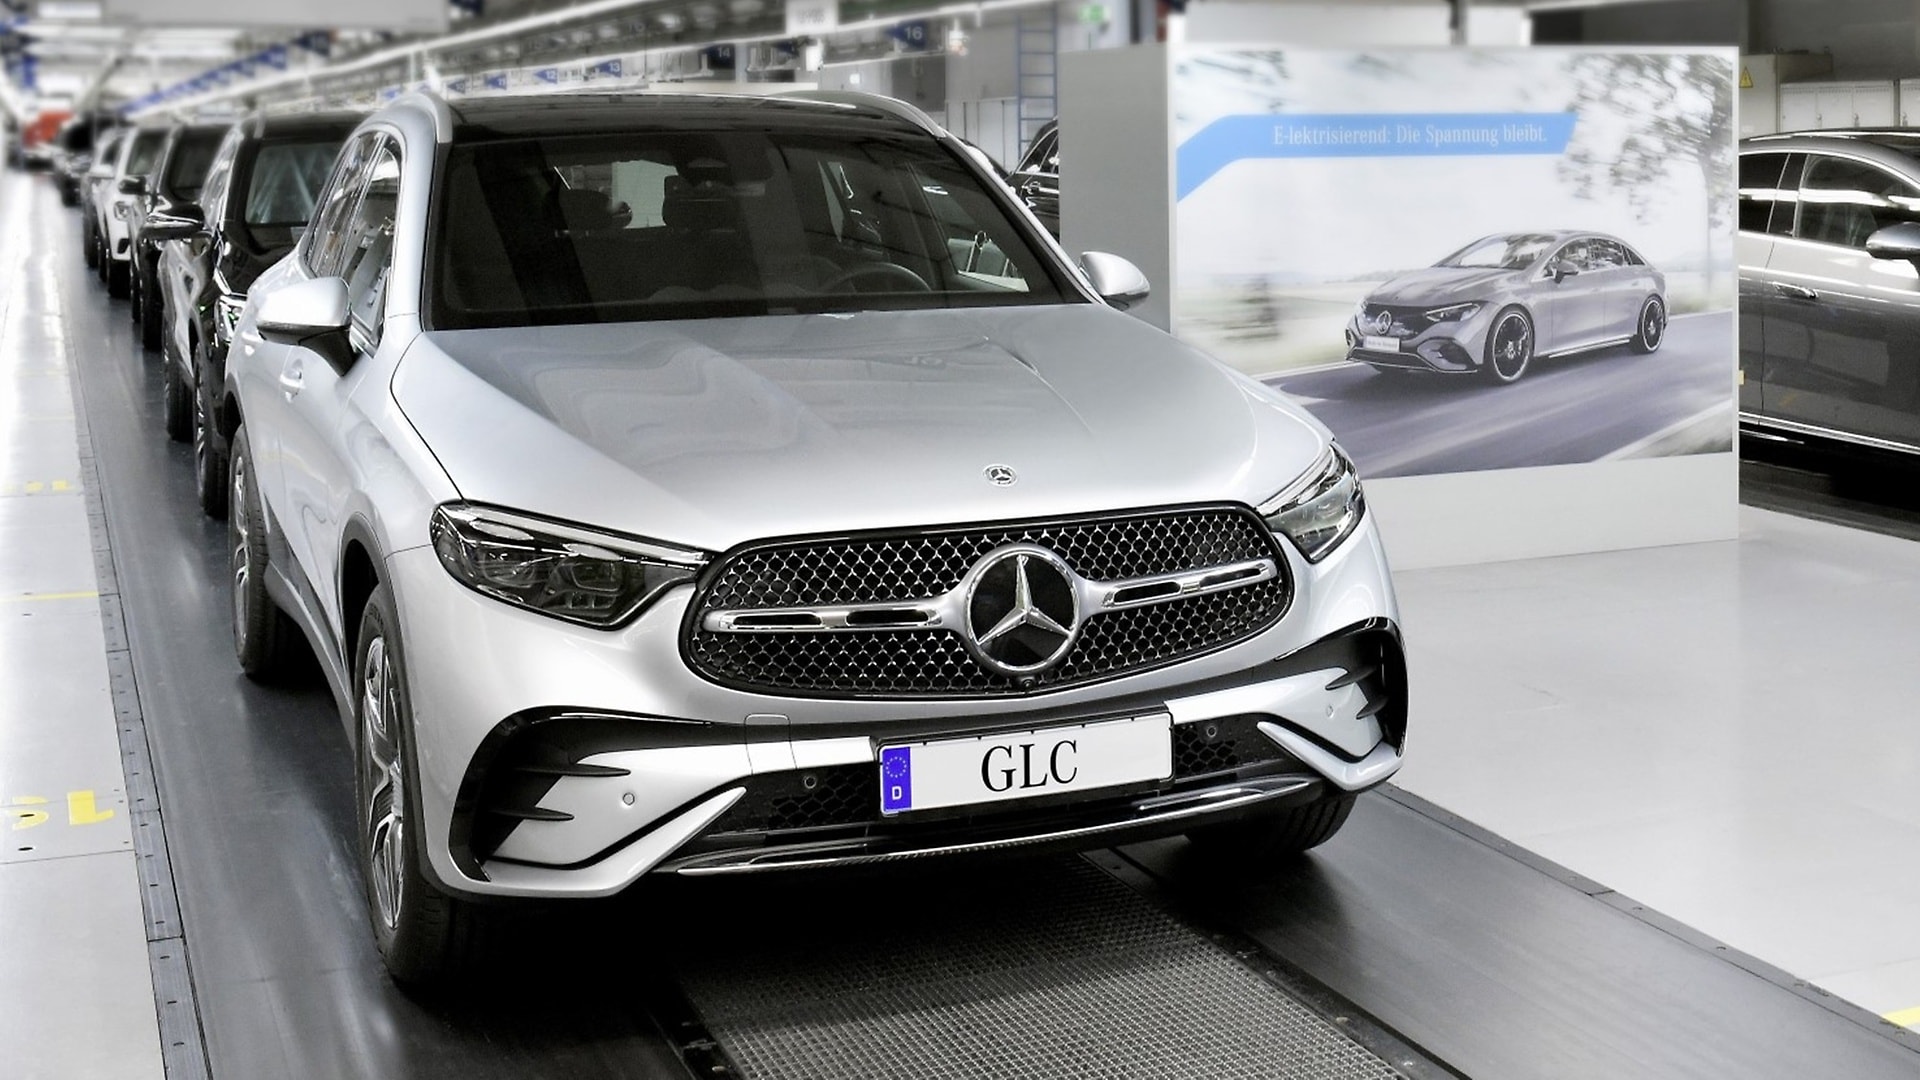 The new Mercedes-Benz GLC is now rolling off the production line in Bremen.